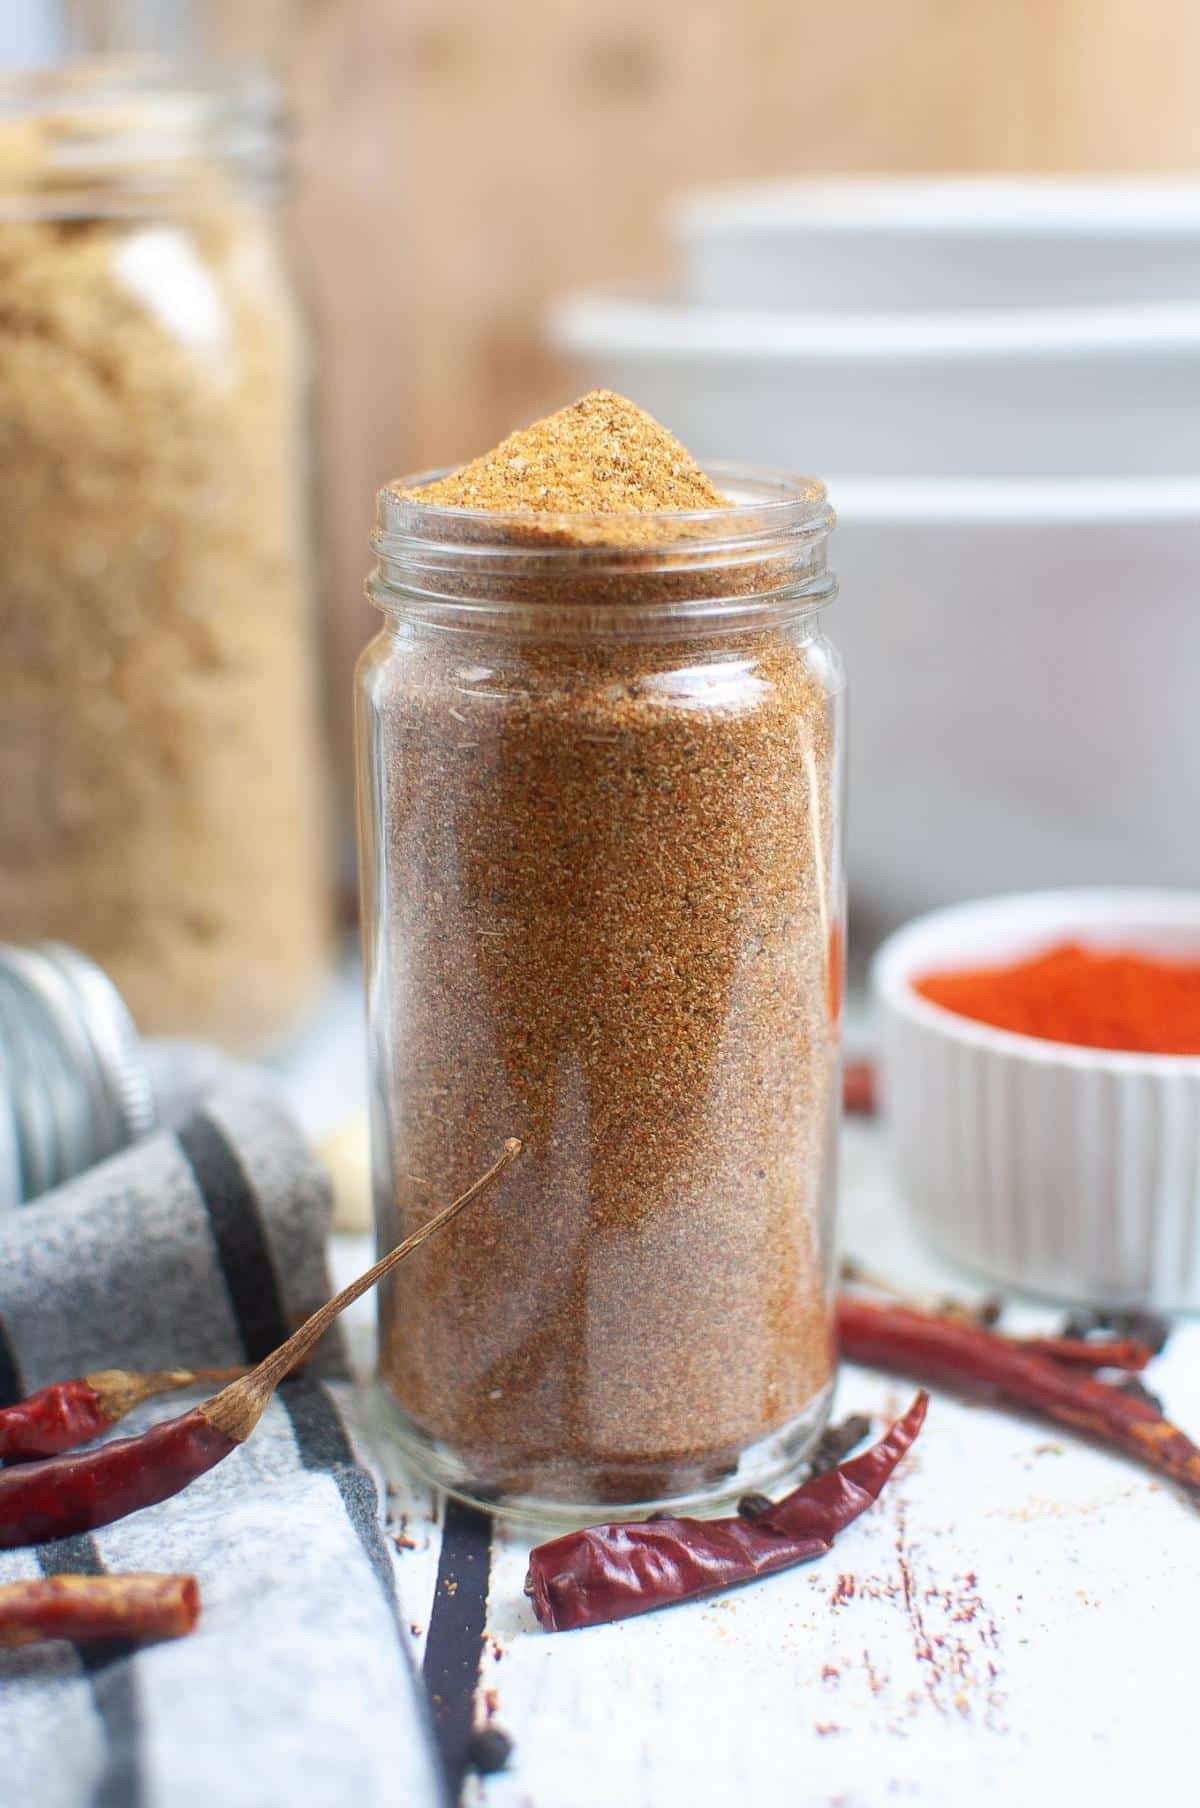 Jar of Dry Rub for Smoking Chicken on table.